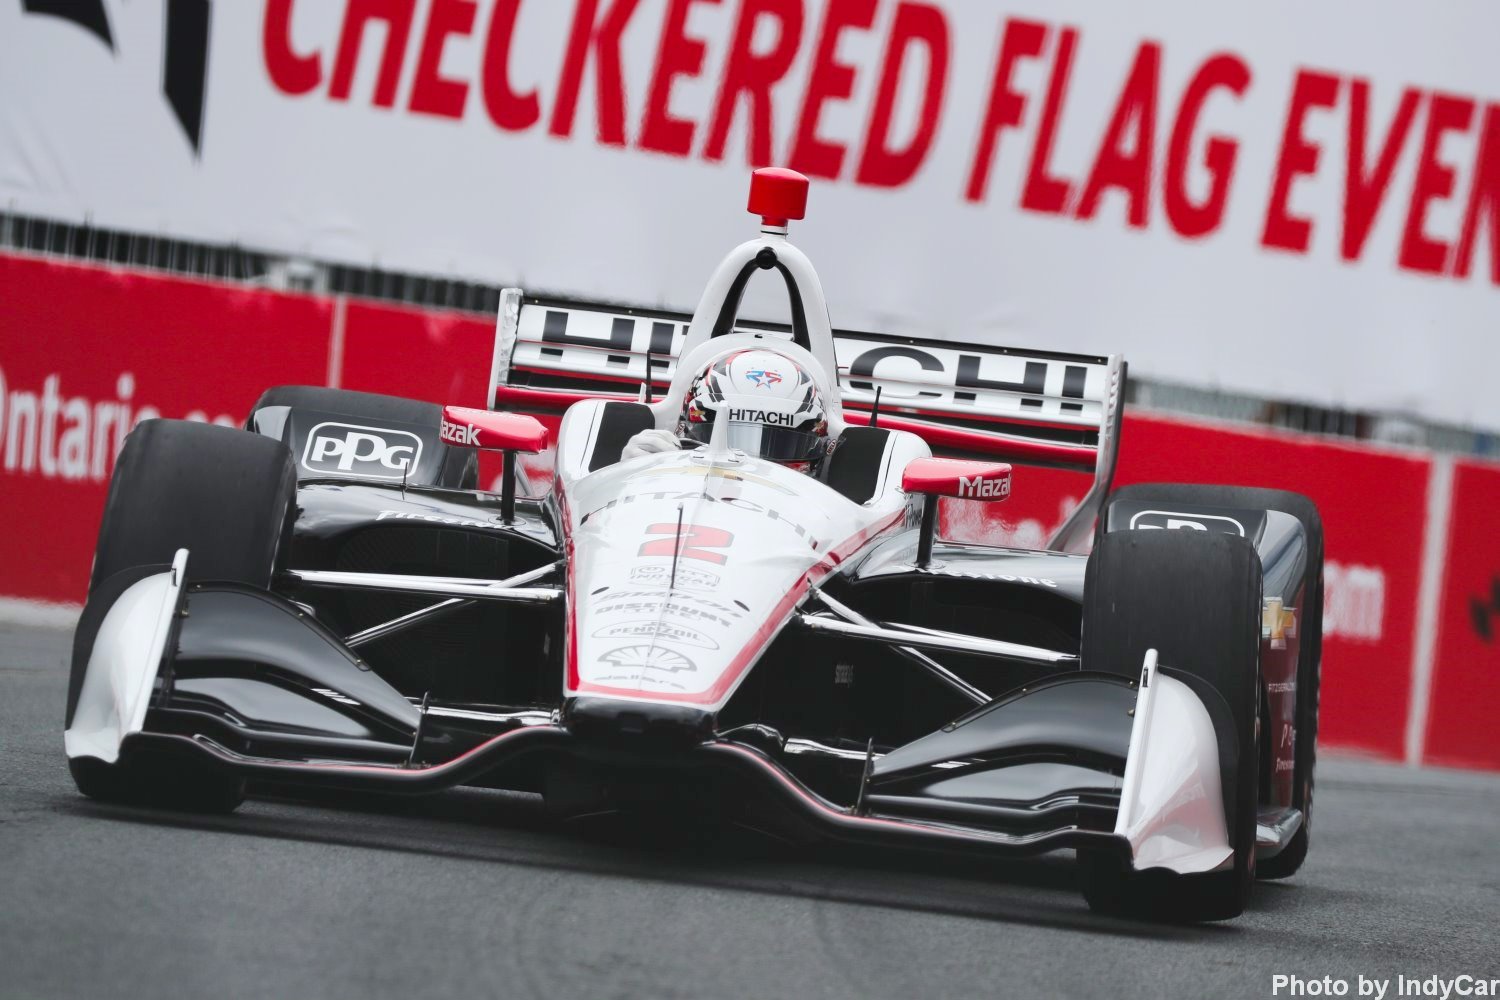 Can Newgarden repel Rossi's charge?